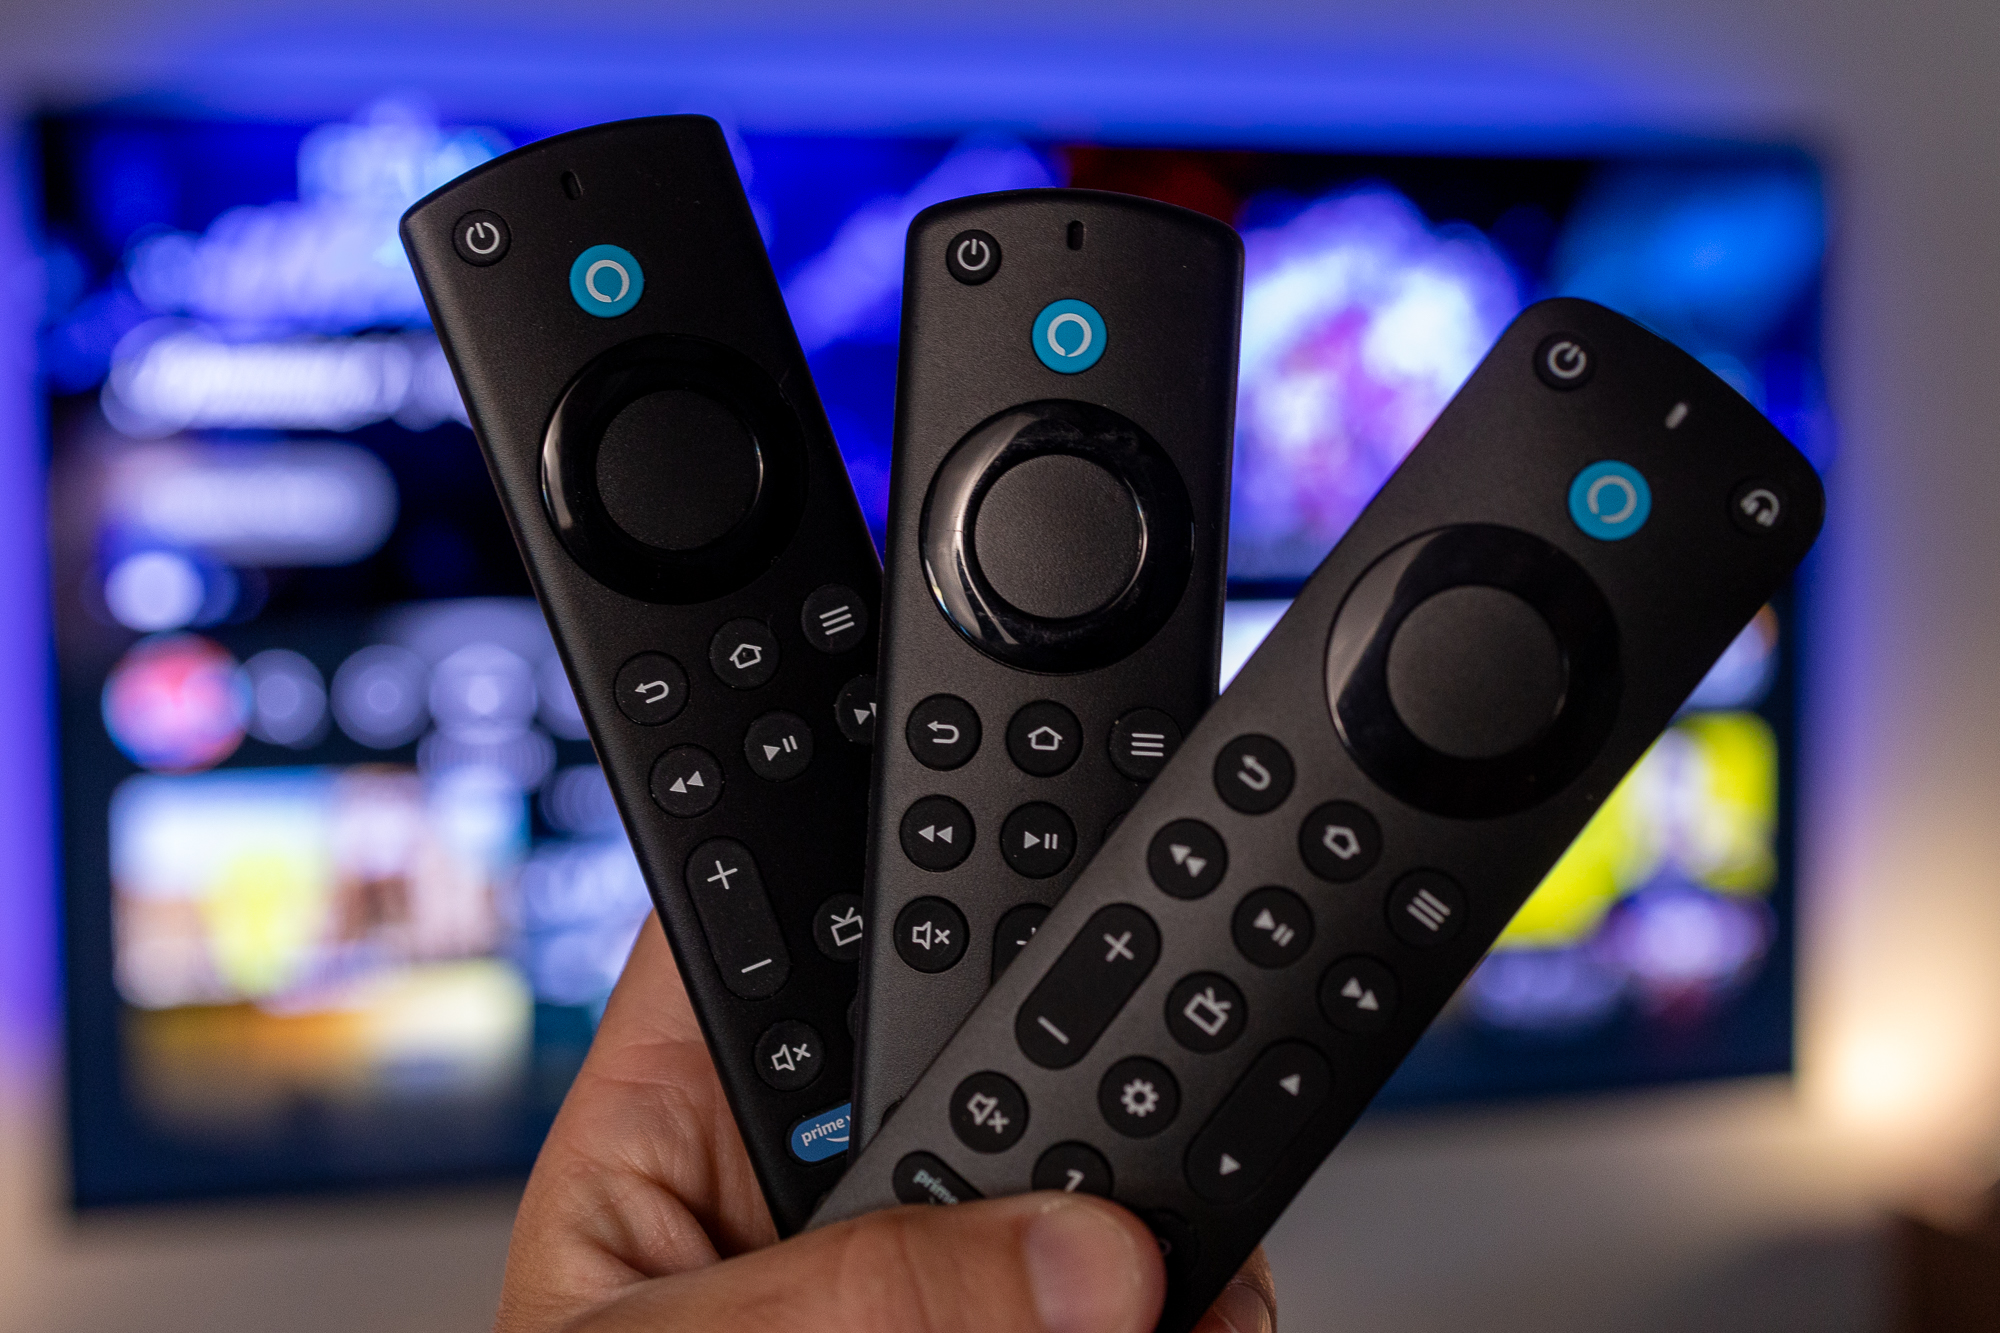 How to reset an  Fire TV remote in less than 2 minutes